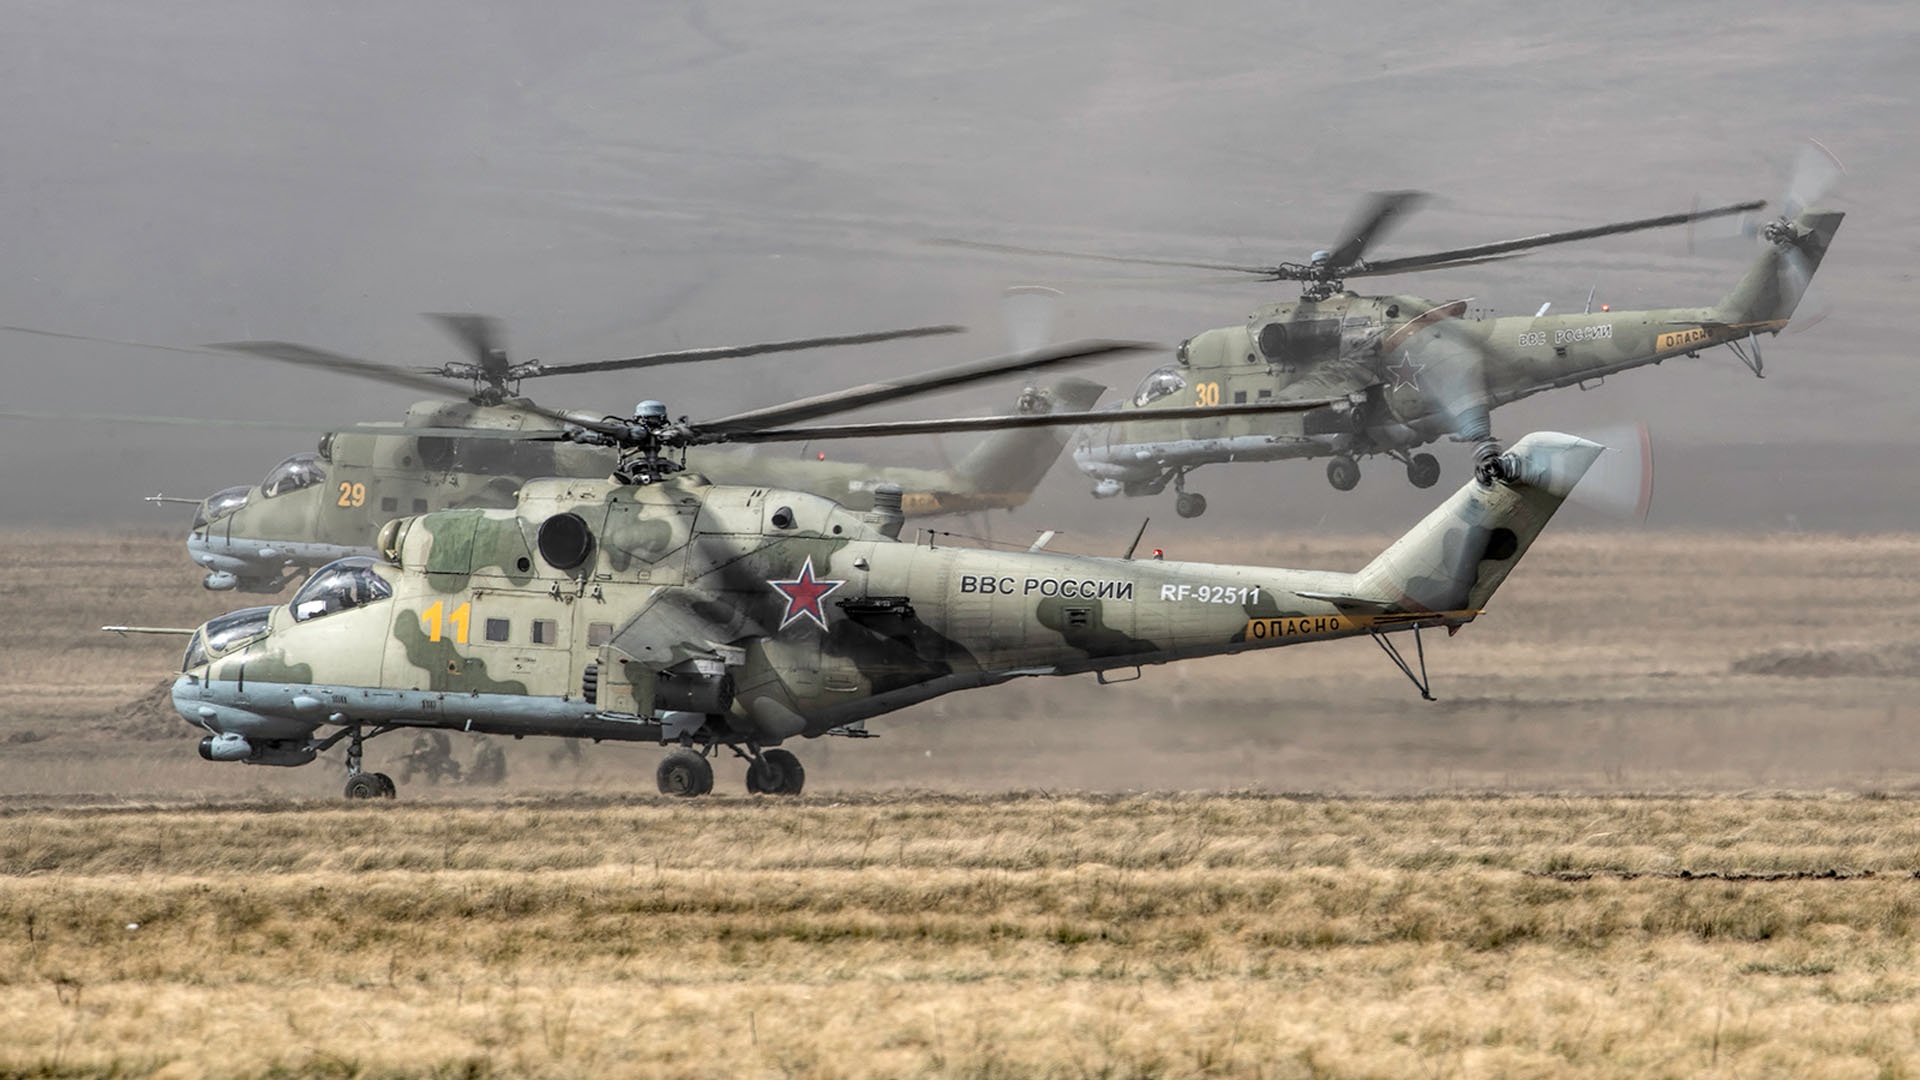 General 1920x1080 vehicle military helicopters military vehicle aircraft military aircraft Mil Mi-24 Russian Air Force attack helicopters side view Mil Helicopters